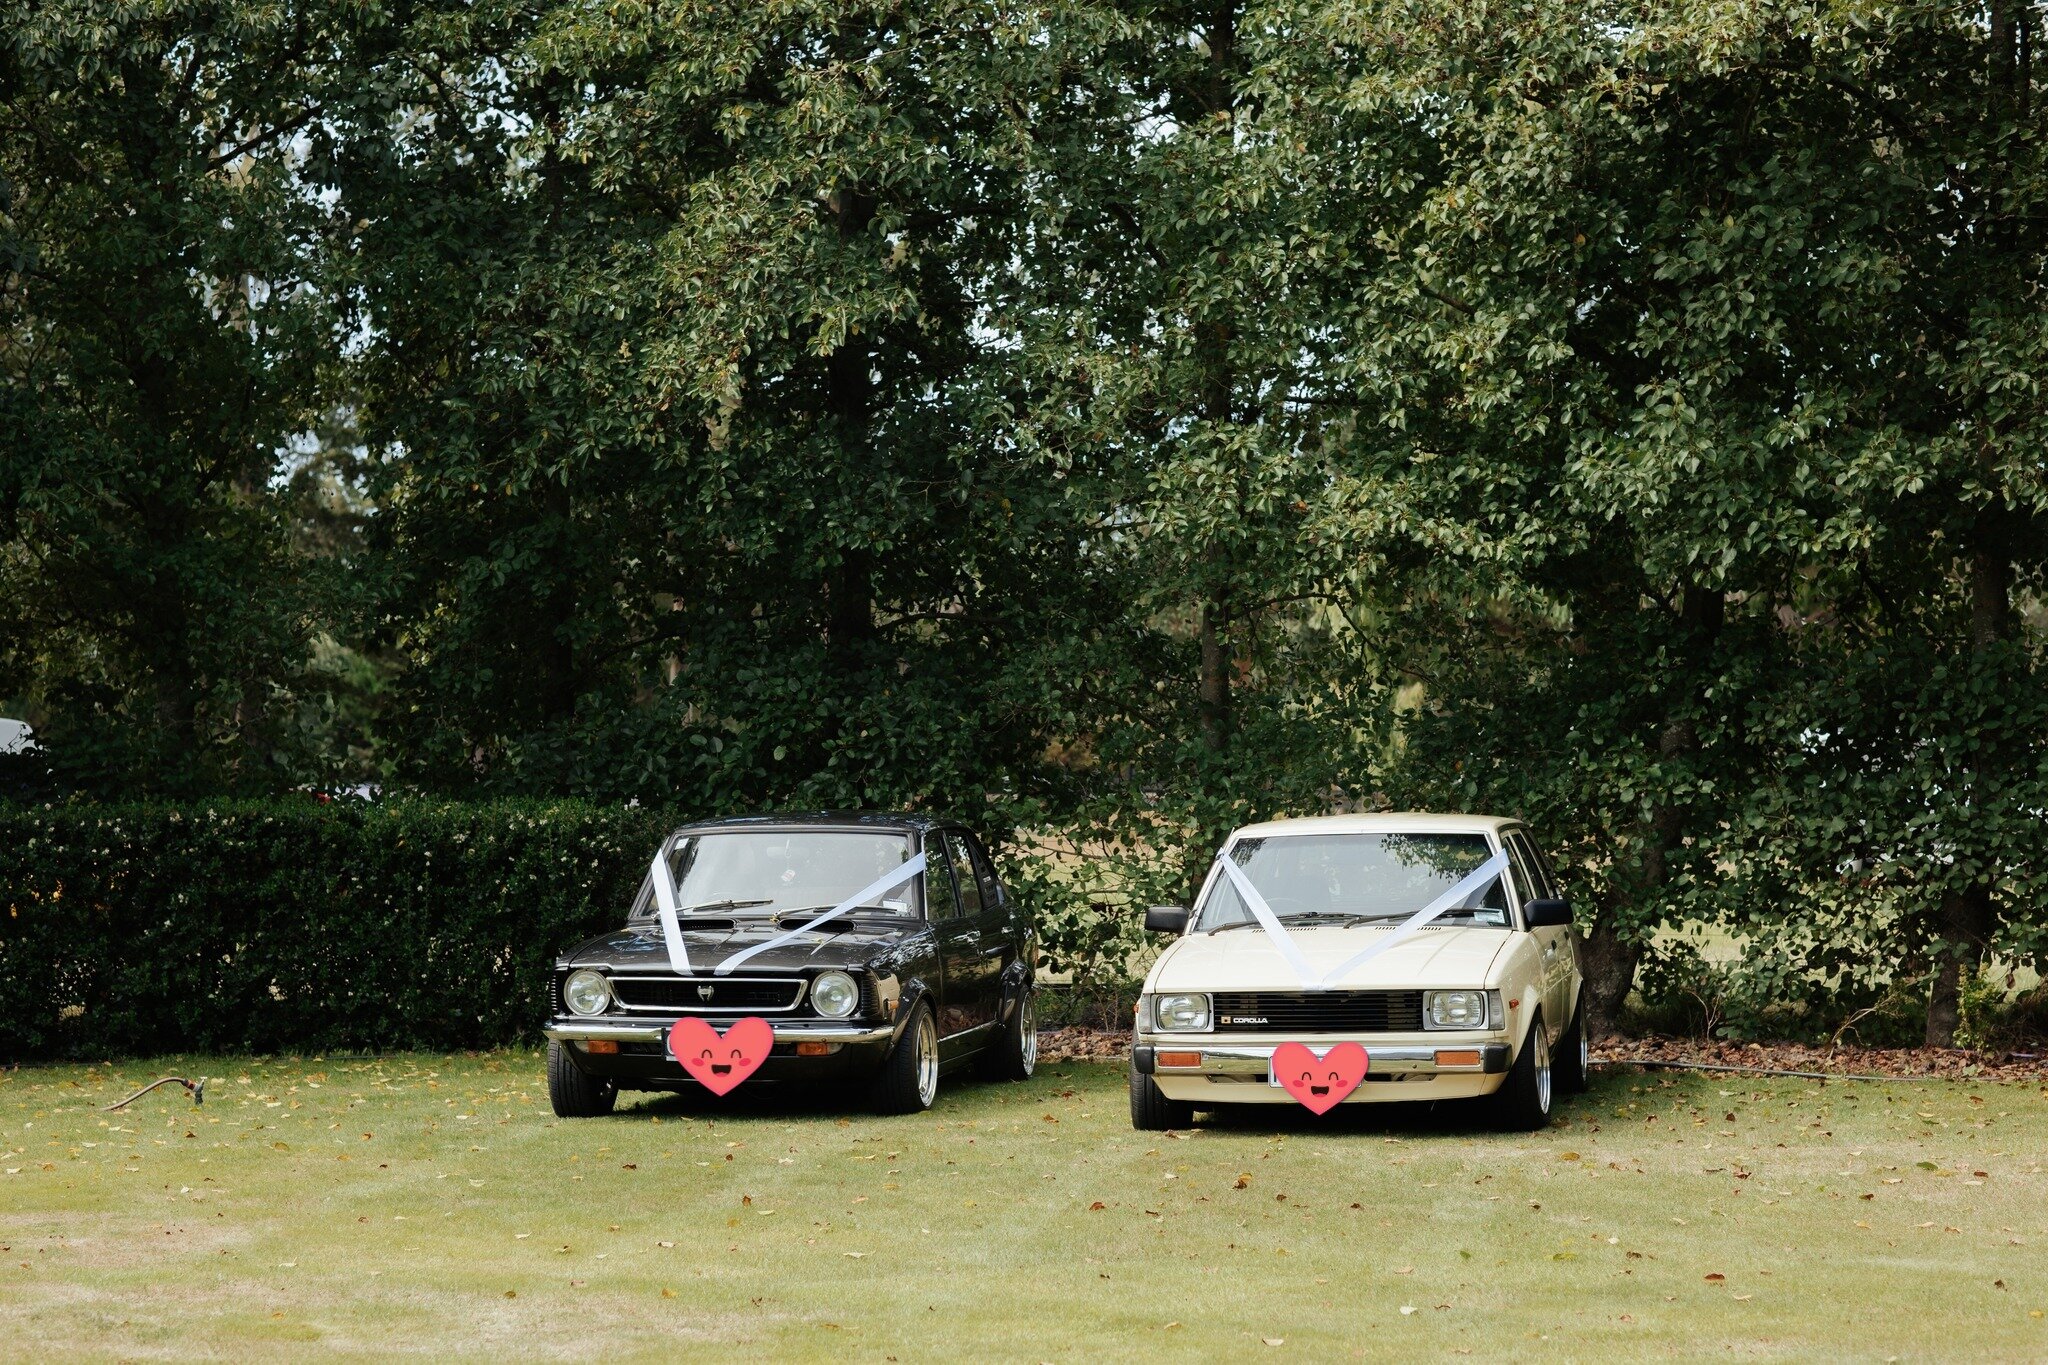 Car appreciation post 🥰 

What would be your car of choice for your wedding day? 🚗

Photo Credit: @susannahblatchford 

#northcanterburyweddings #northcanterburycelebrant #woodendcelebrant #weddings #weddingcars #cars